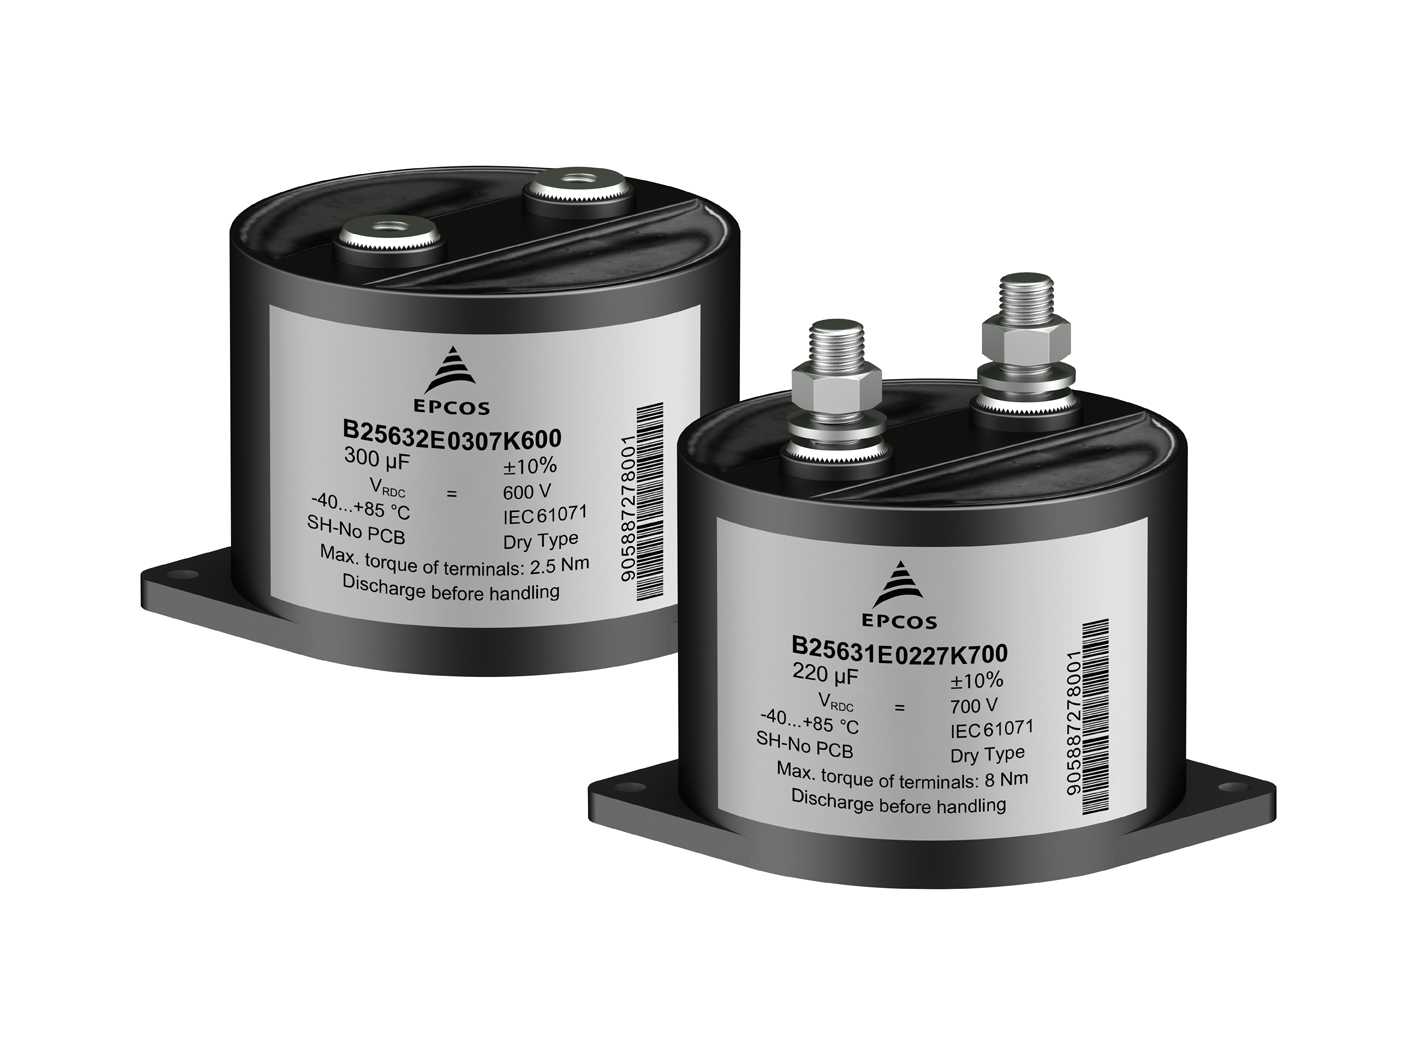 TDK Introduces DC Link Capacitors with Exceptionally Low ESL